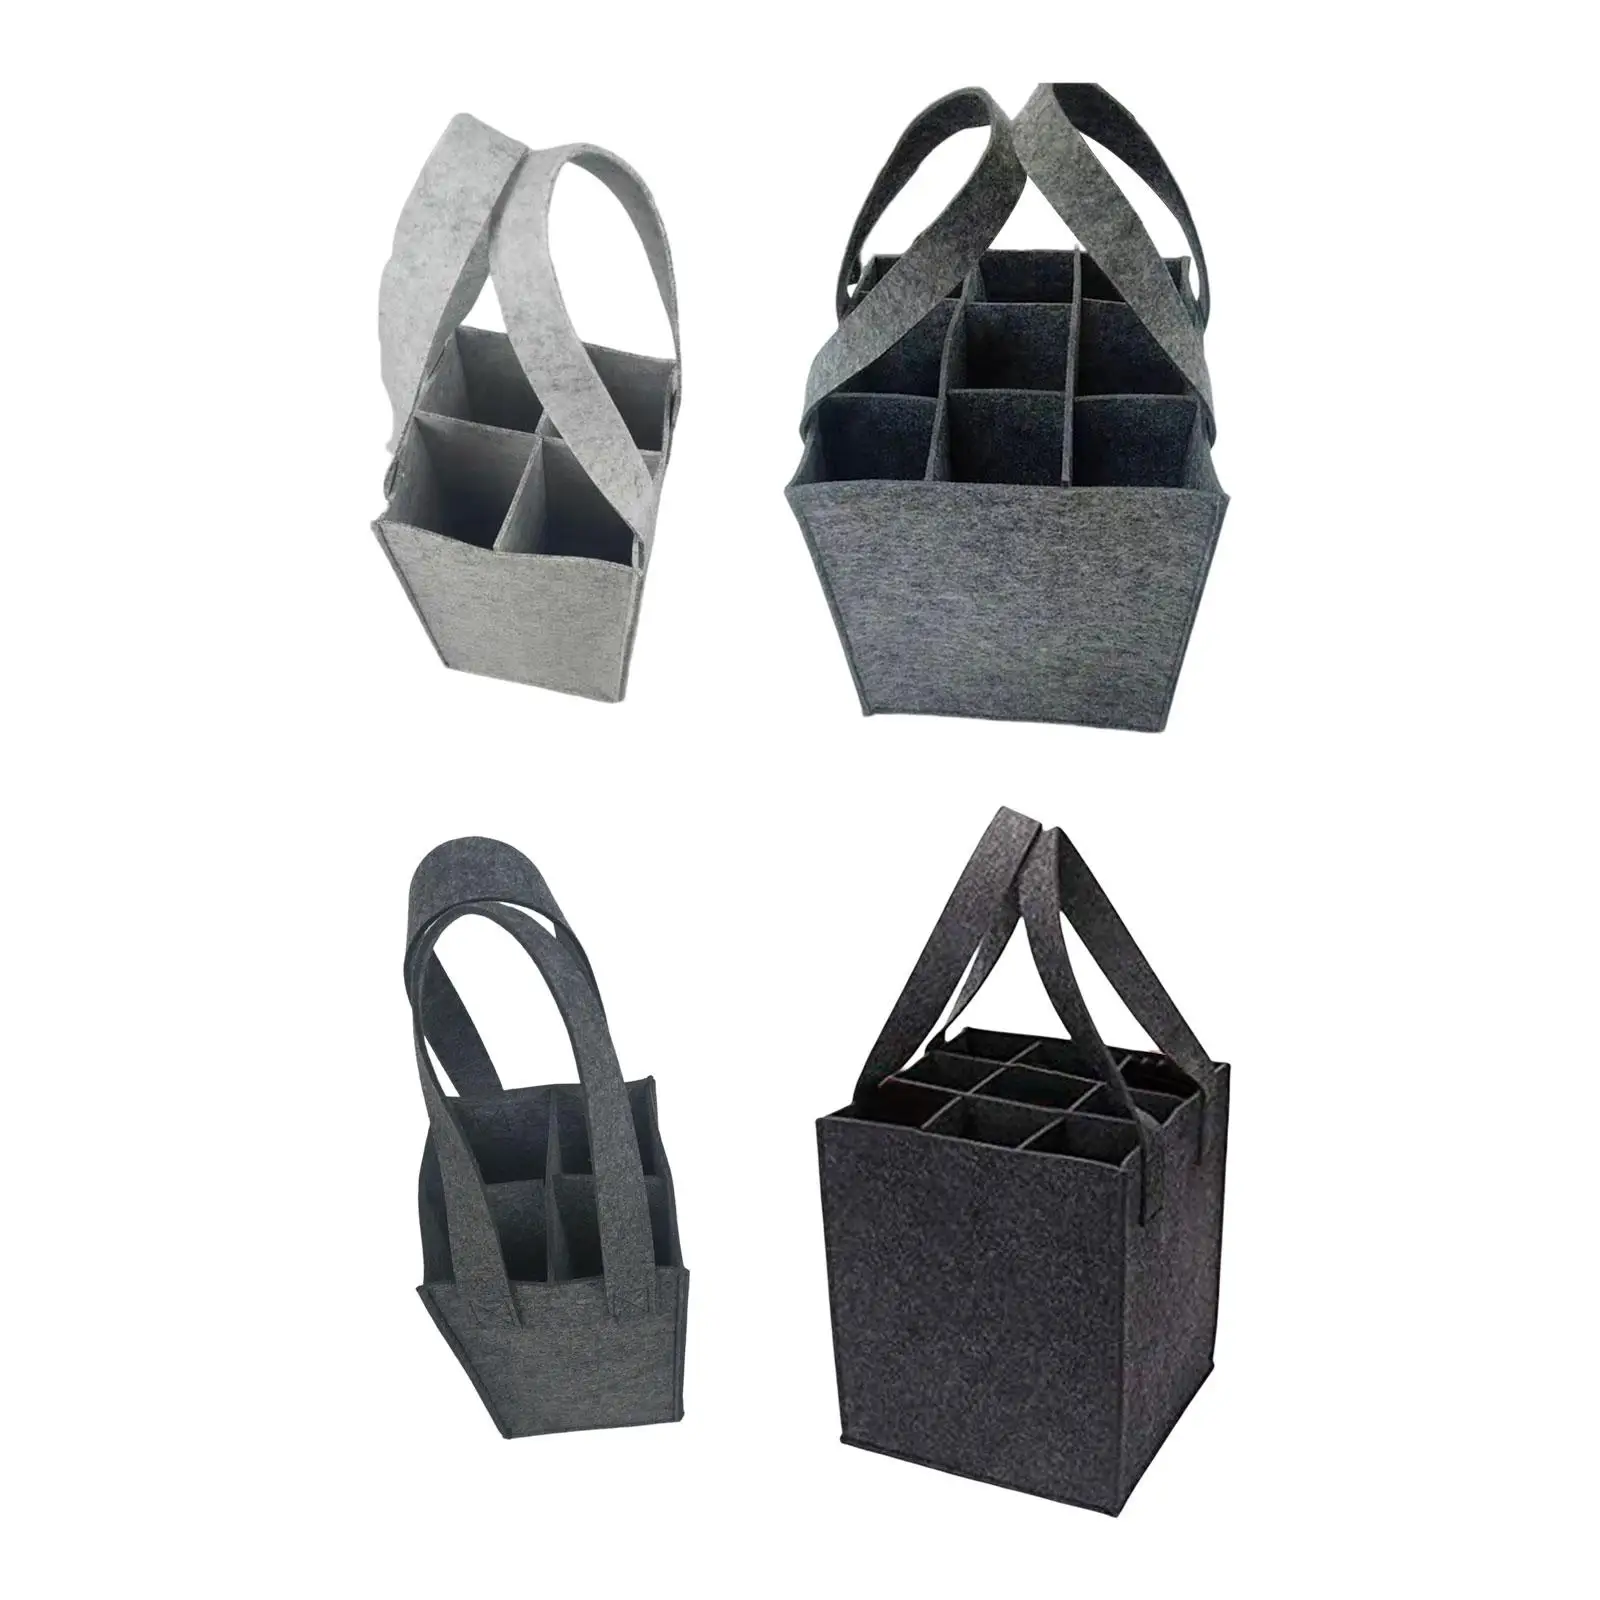 Bottle Bag Shopping Bags with Compartment Felt for Wedding Gift Thanksgiving